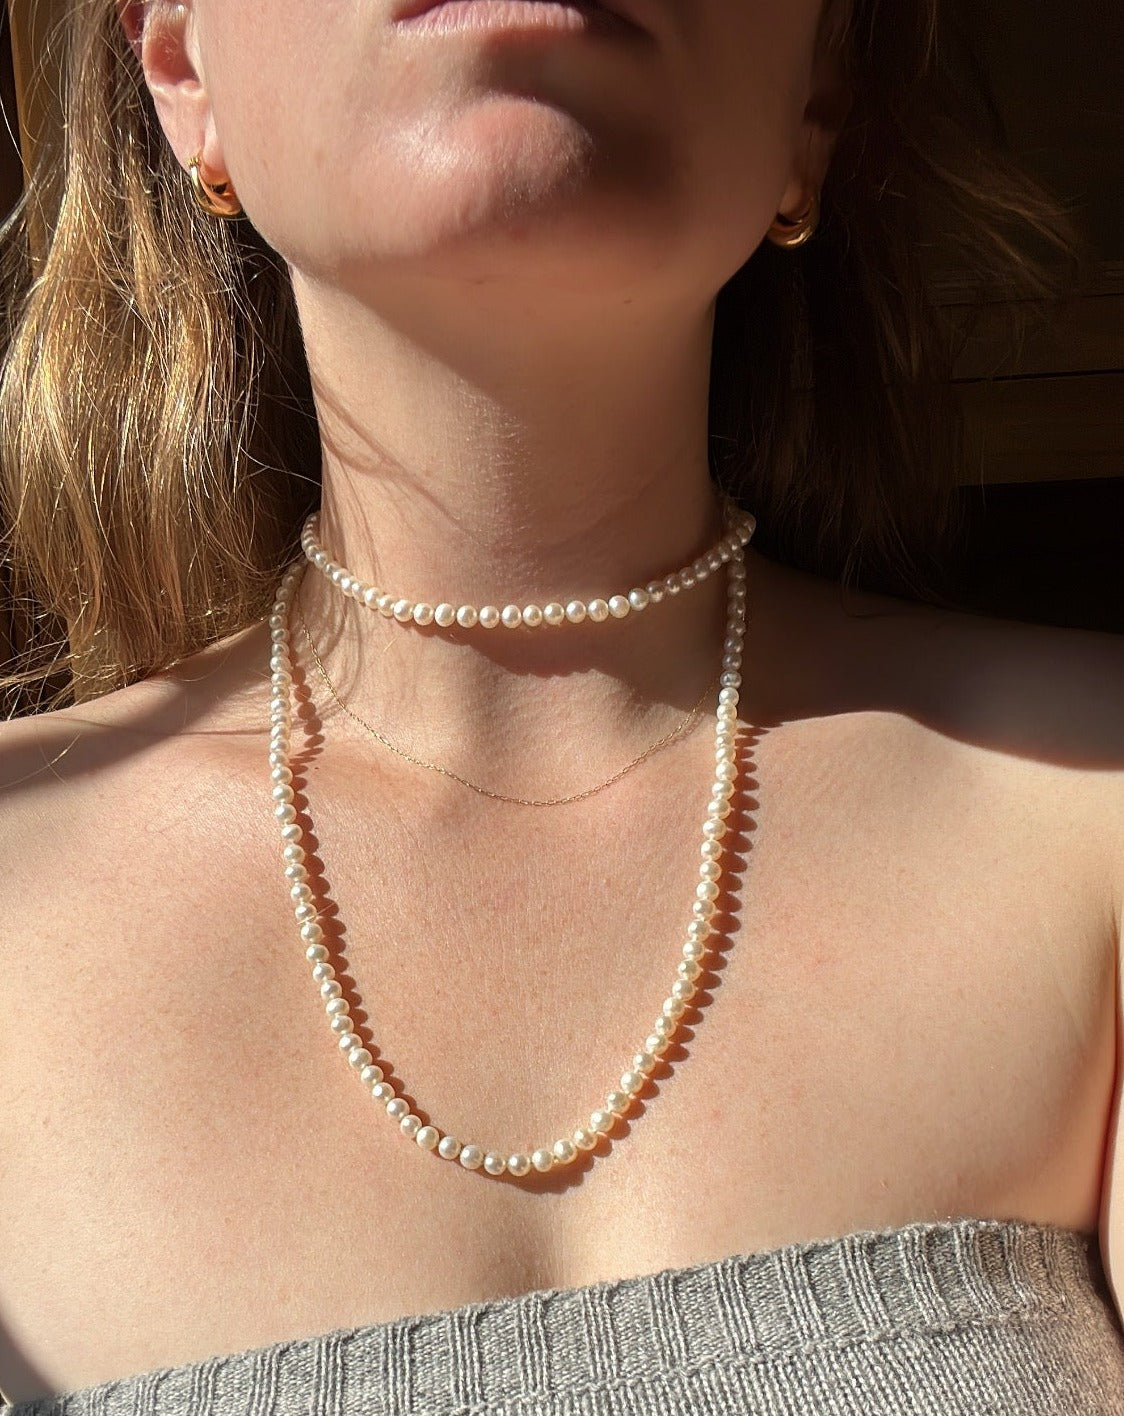 Vintage string of pearls worn by a woman